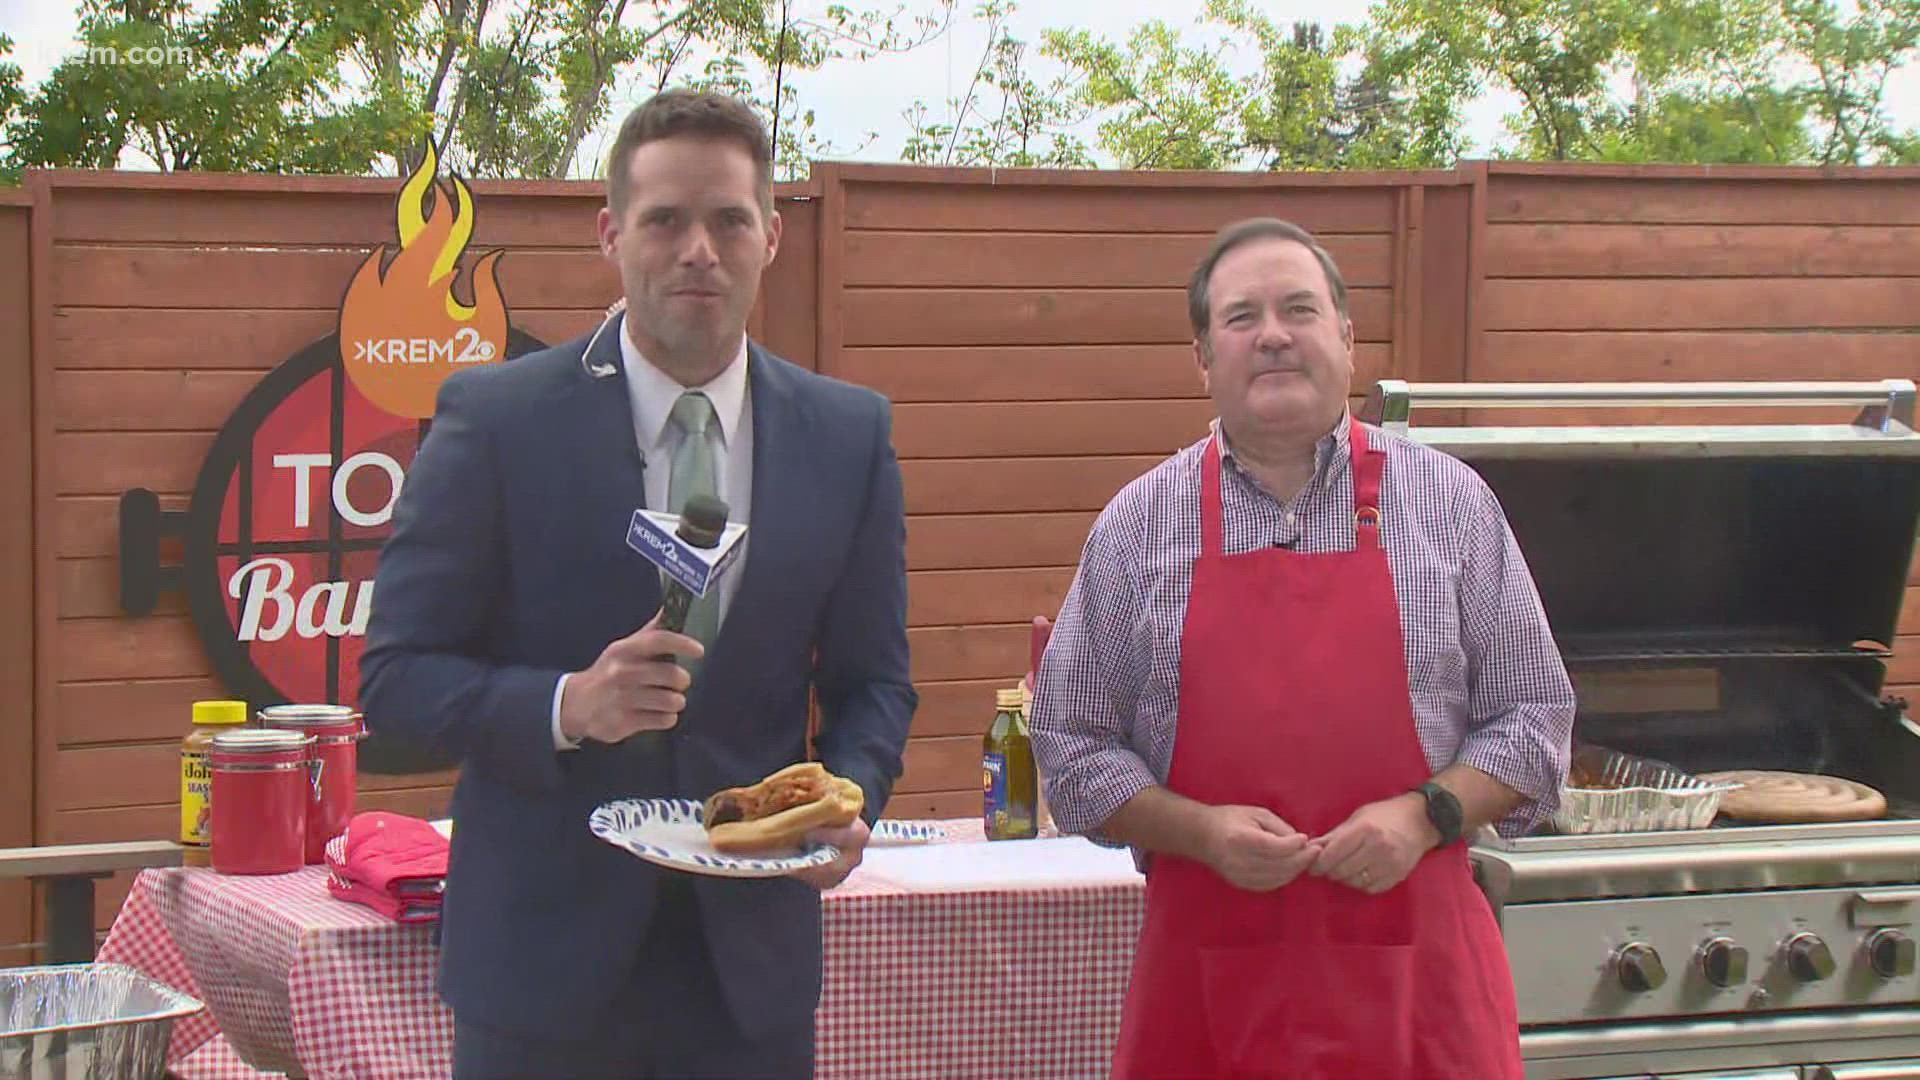 Cook alongside Tom Sherry during his BBQ on KREM 2 News at 5 and 6 p.m. on Thursday, May 26.